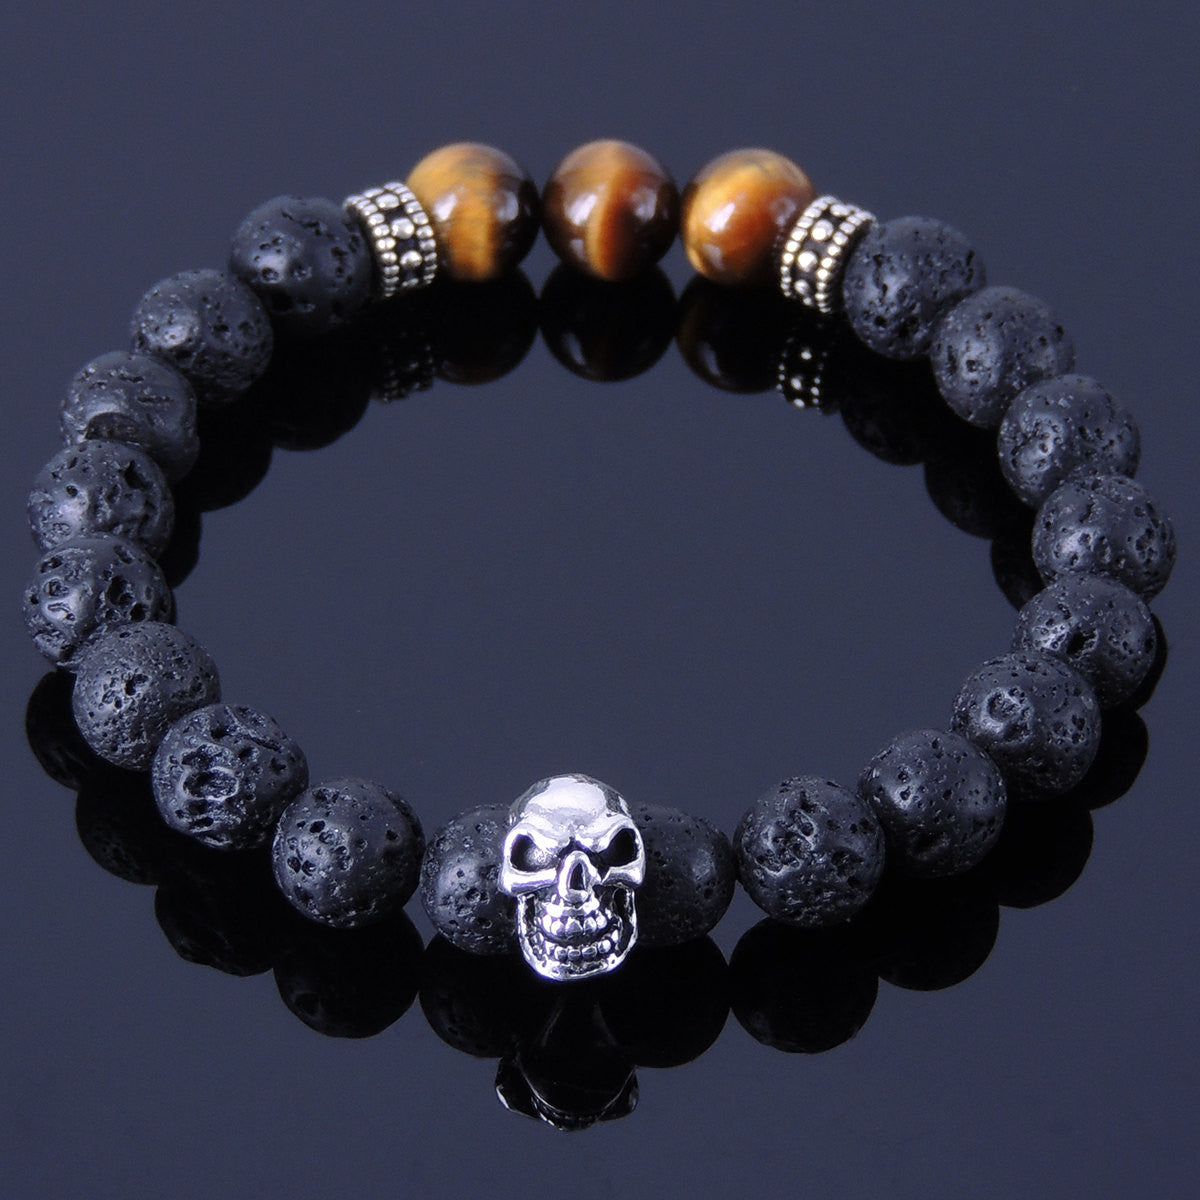 8mm Lava Rock & Brown Tiger Eye Healing Gemstone Bracelet with S925 Sterling Silver Spacers & Skull Protection Charm - Handmade by Gem & Silver BR318